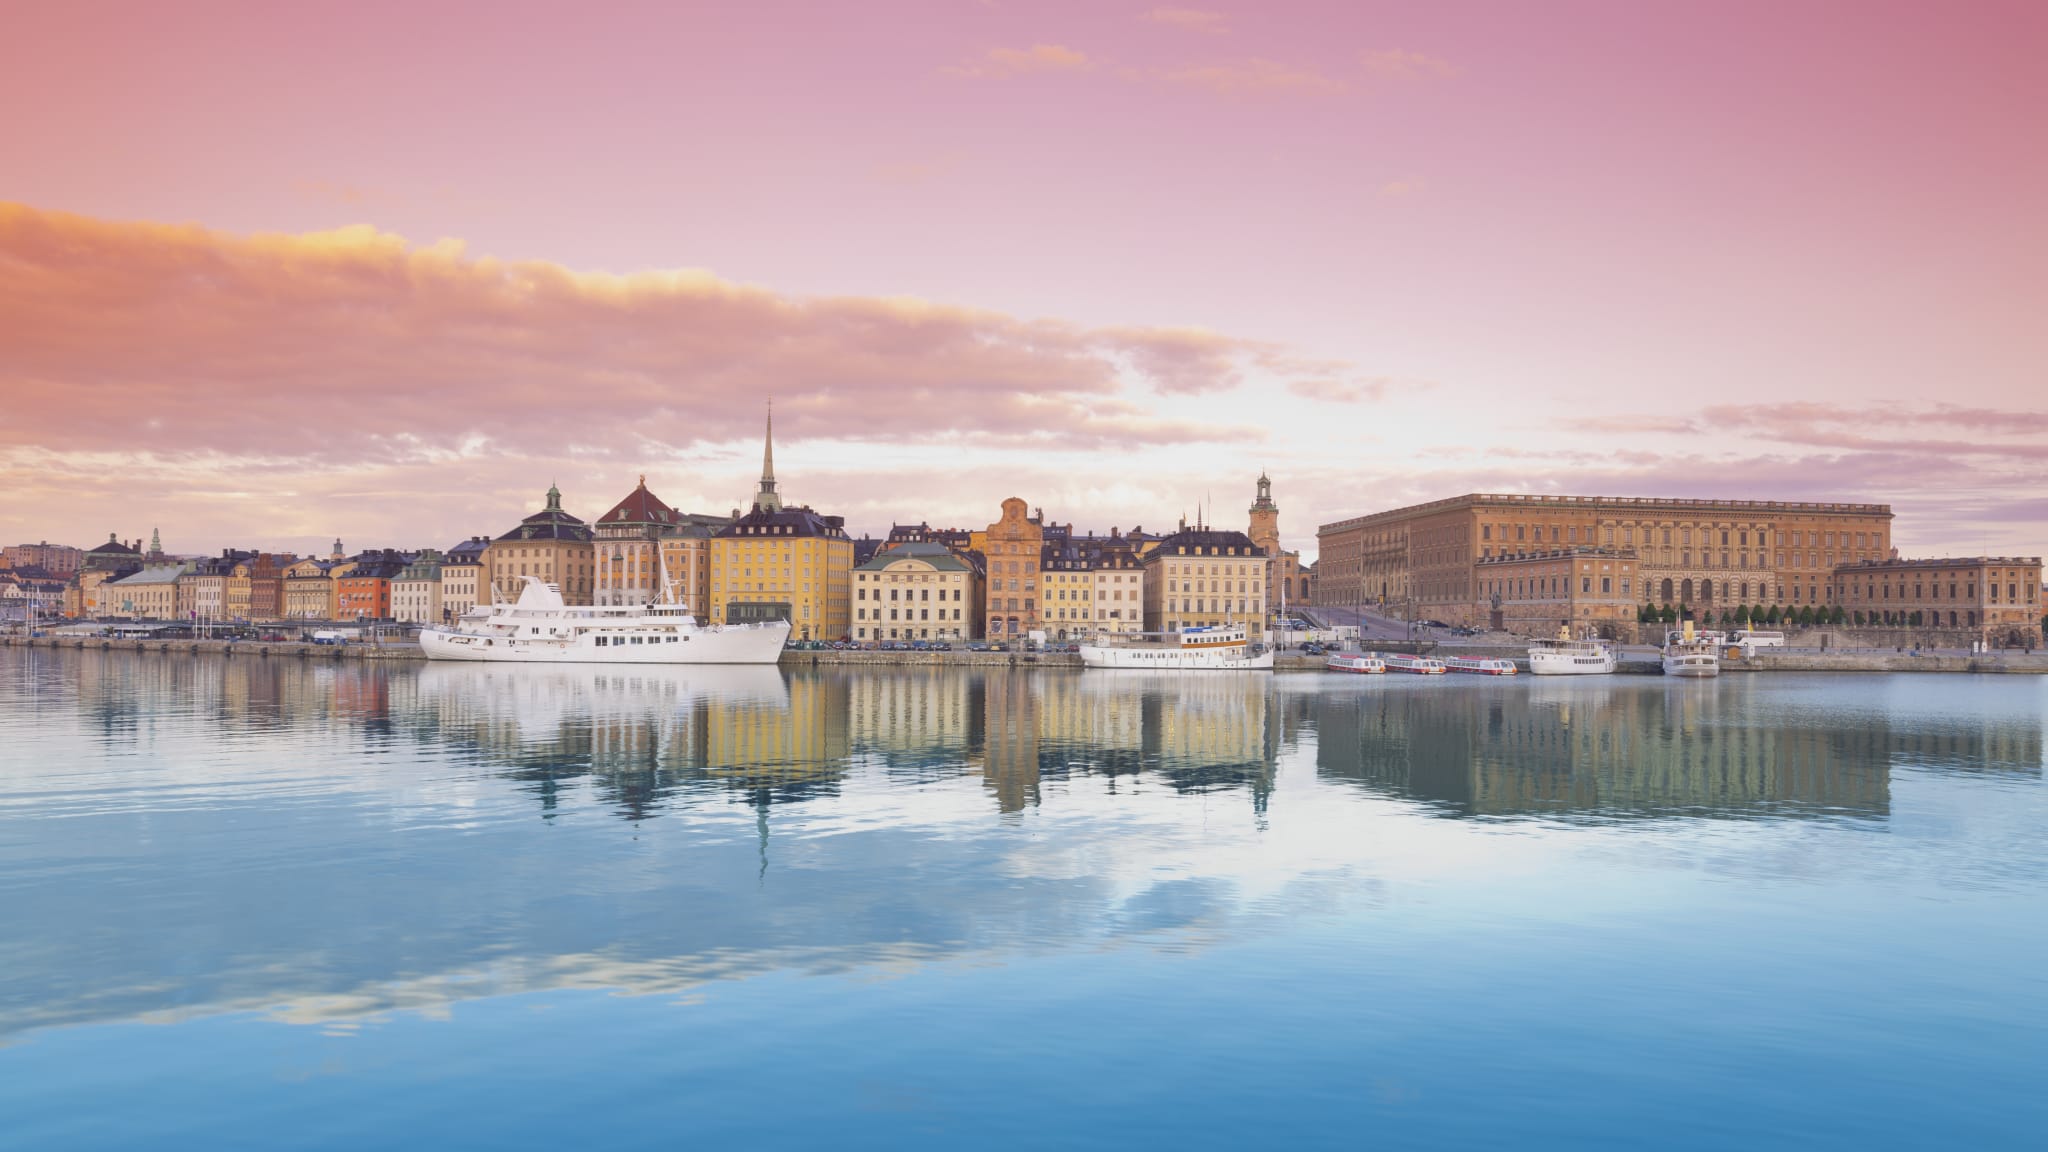 Sweden, Stockholm, View on the Royal Palace and Gamla Stan, old town